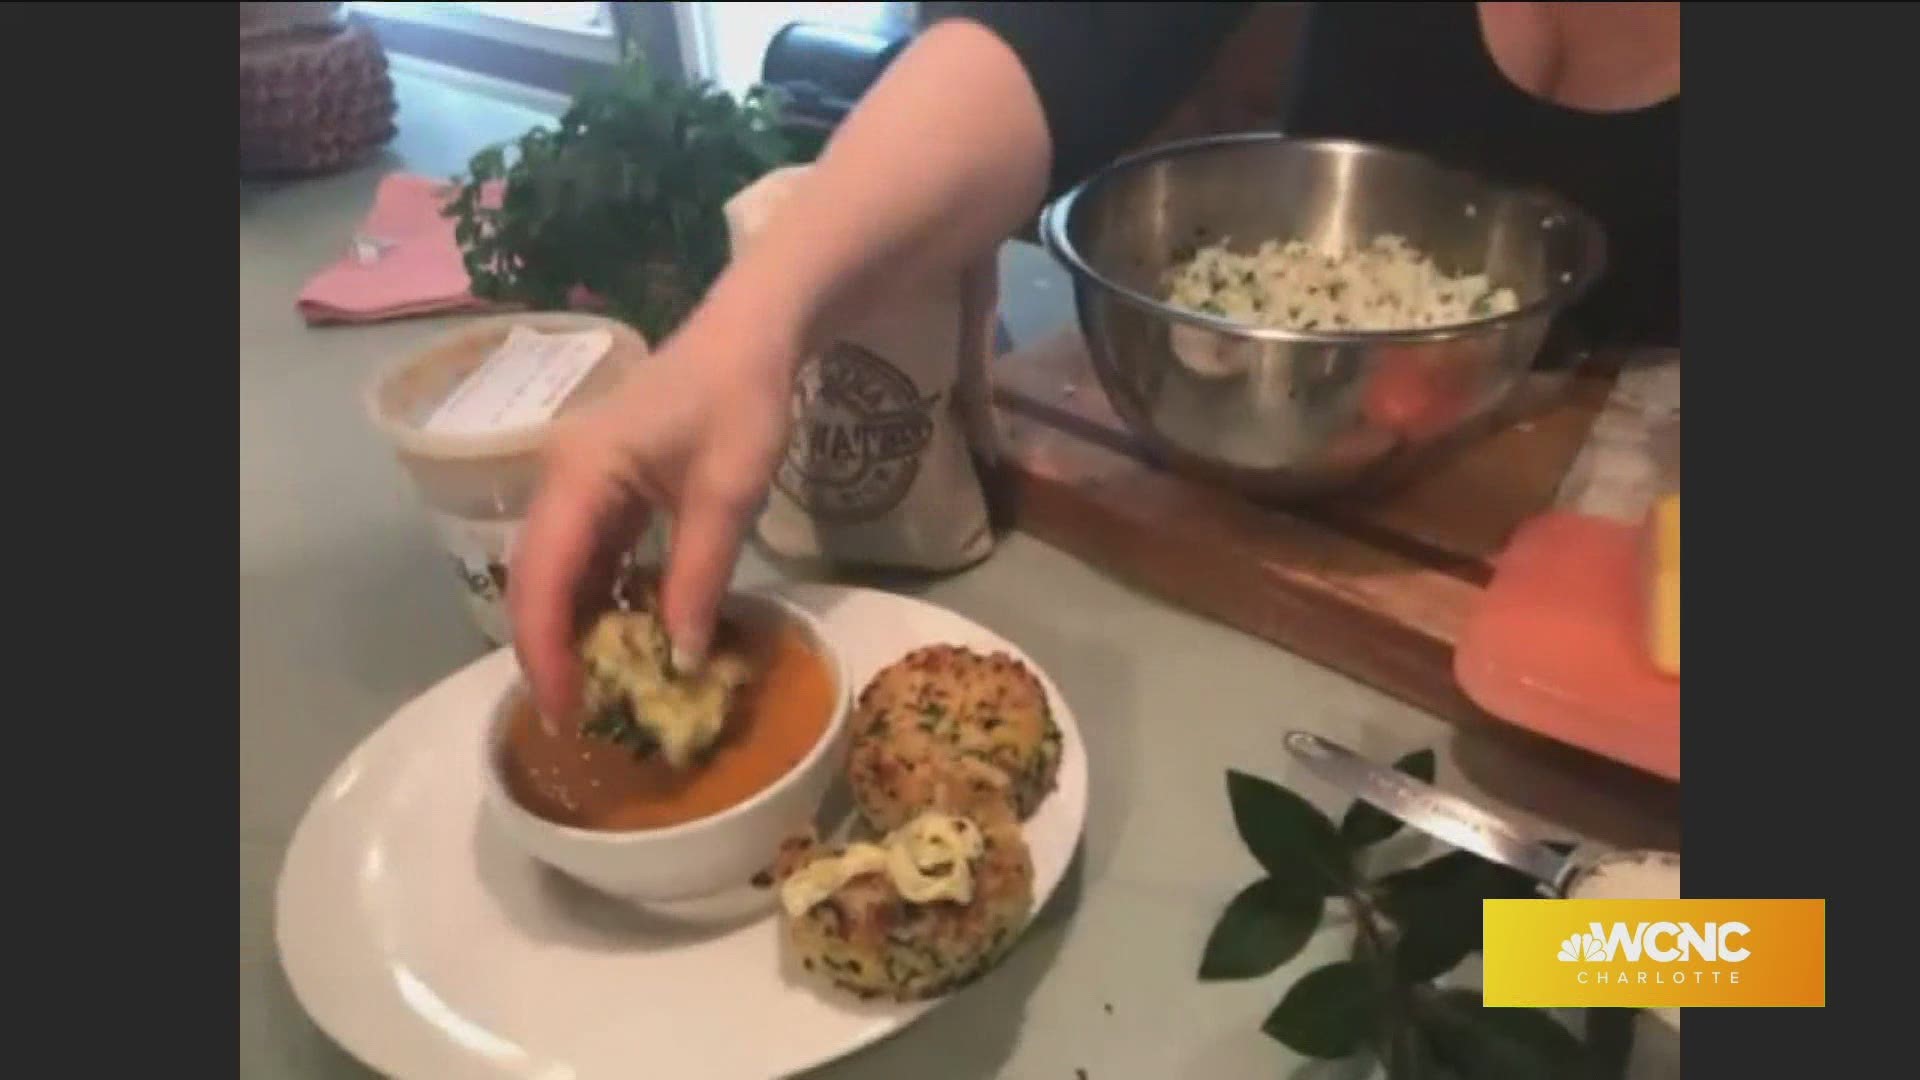 Culinary expert Heidi Billotto shares a recipe for cheese rice cakes